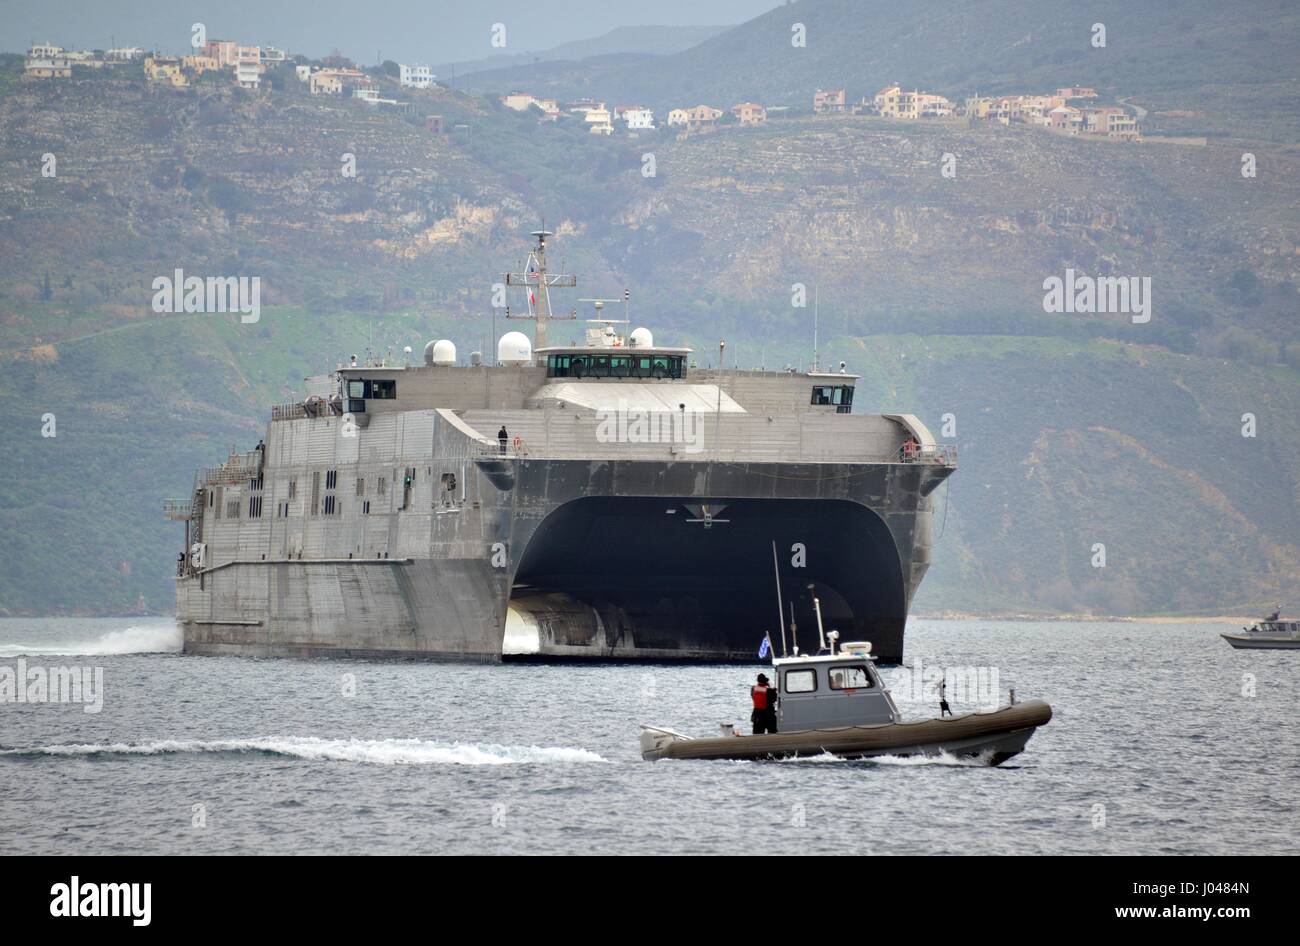 The USN Spearhead-class expeditionary fast transport vessel USNS Spearhead arrives in port February 5, 2014 in Souda Bay, Greece.      (photo by Paul Farley /US Navy  via Planetpix) Stock Photo